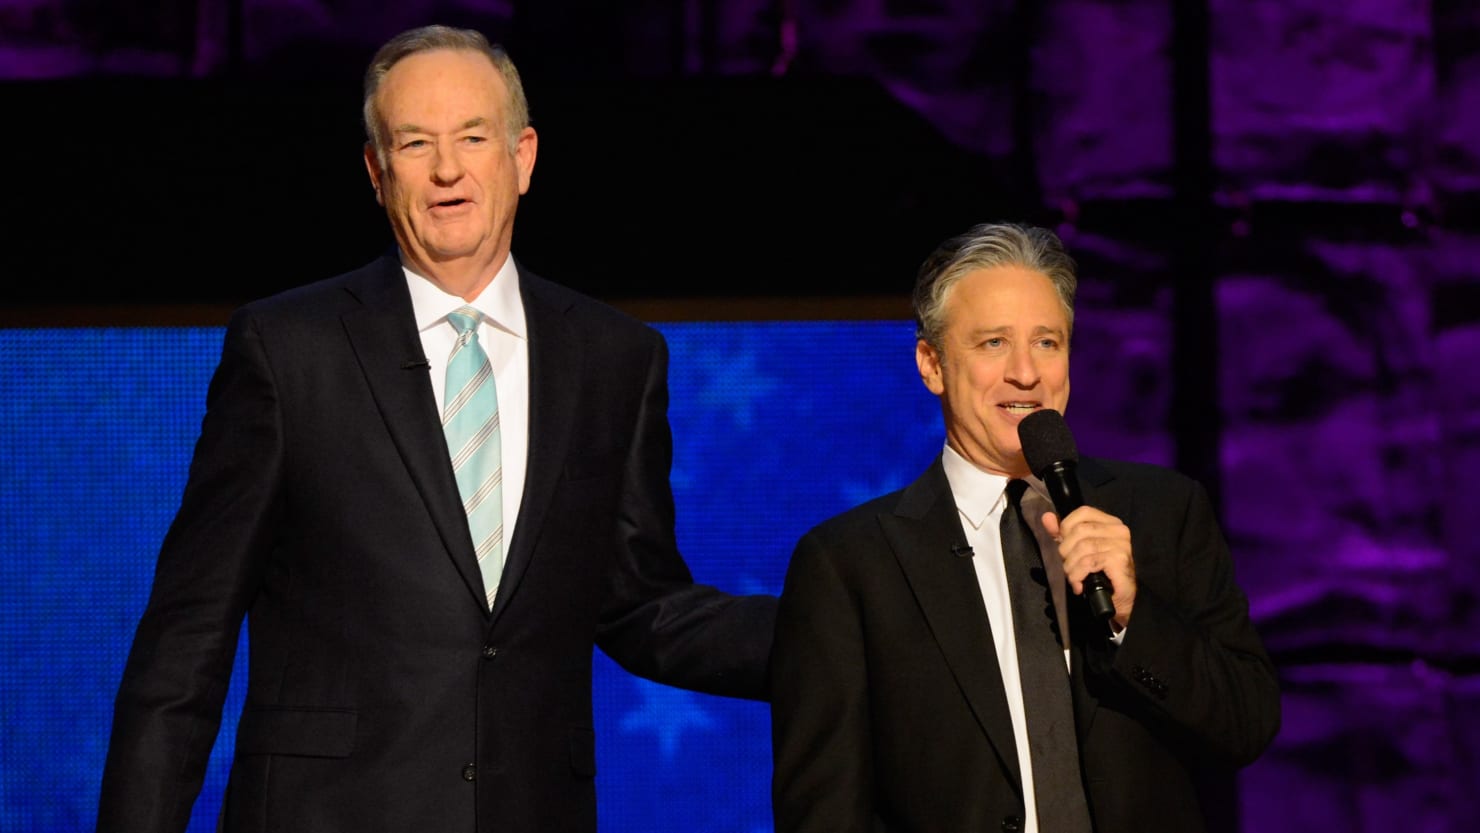 Jon Stewart books Bill O’Reilly for the “Daily Show” after the RNC